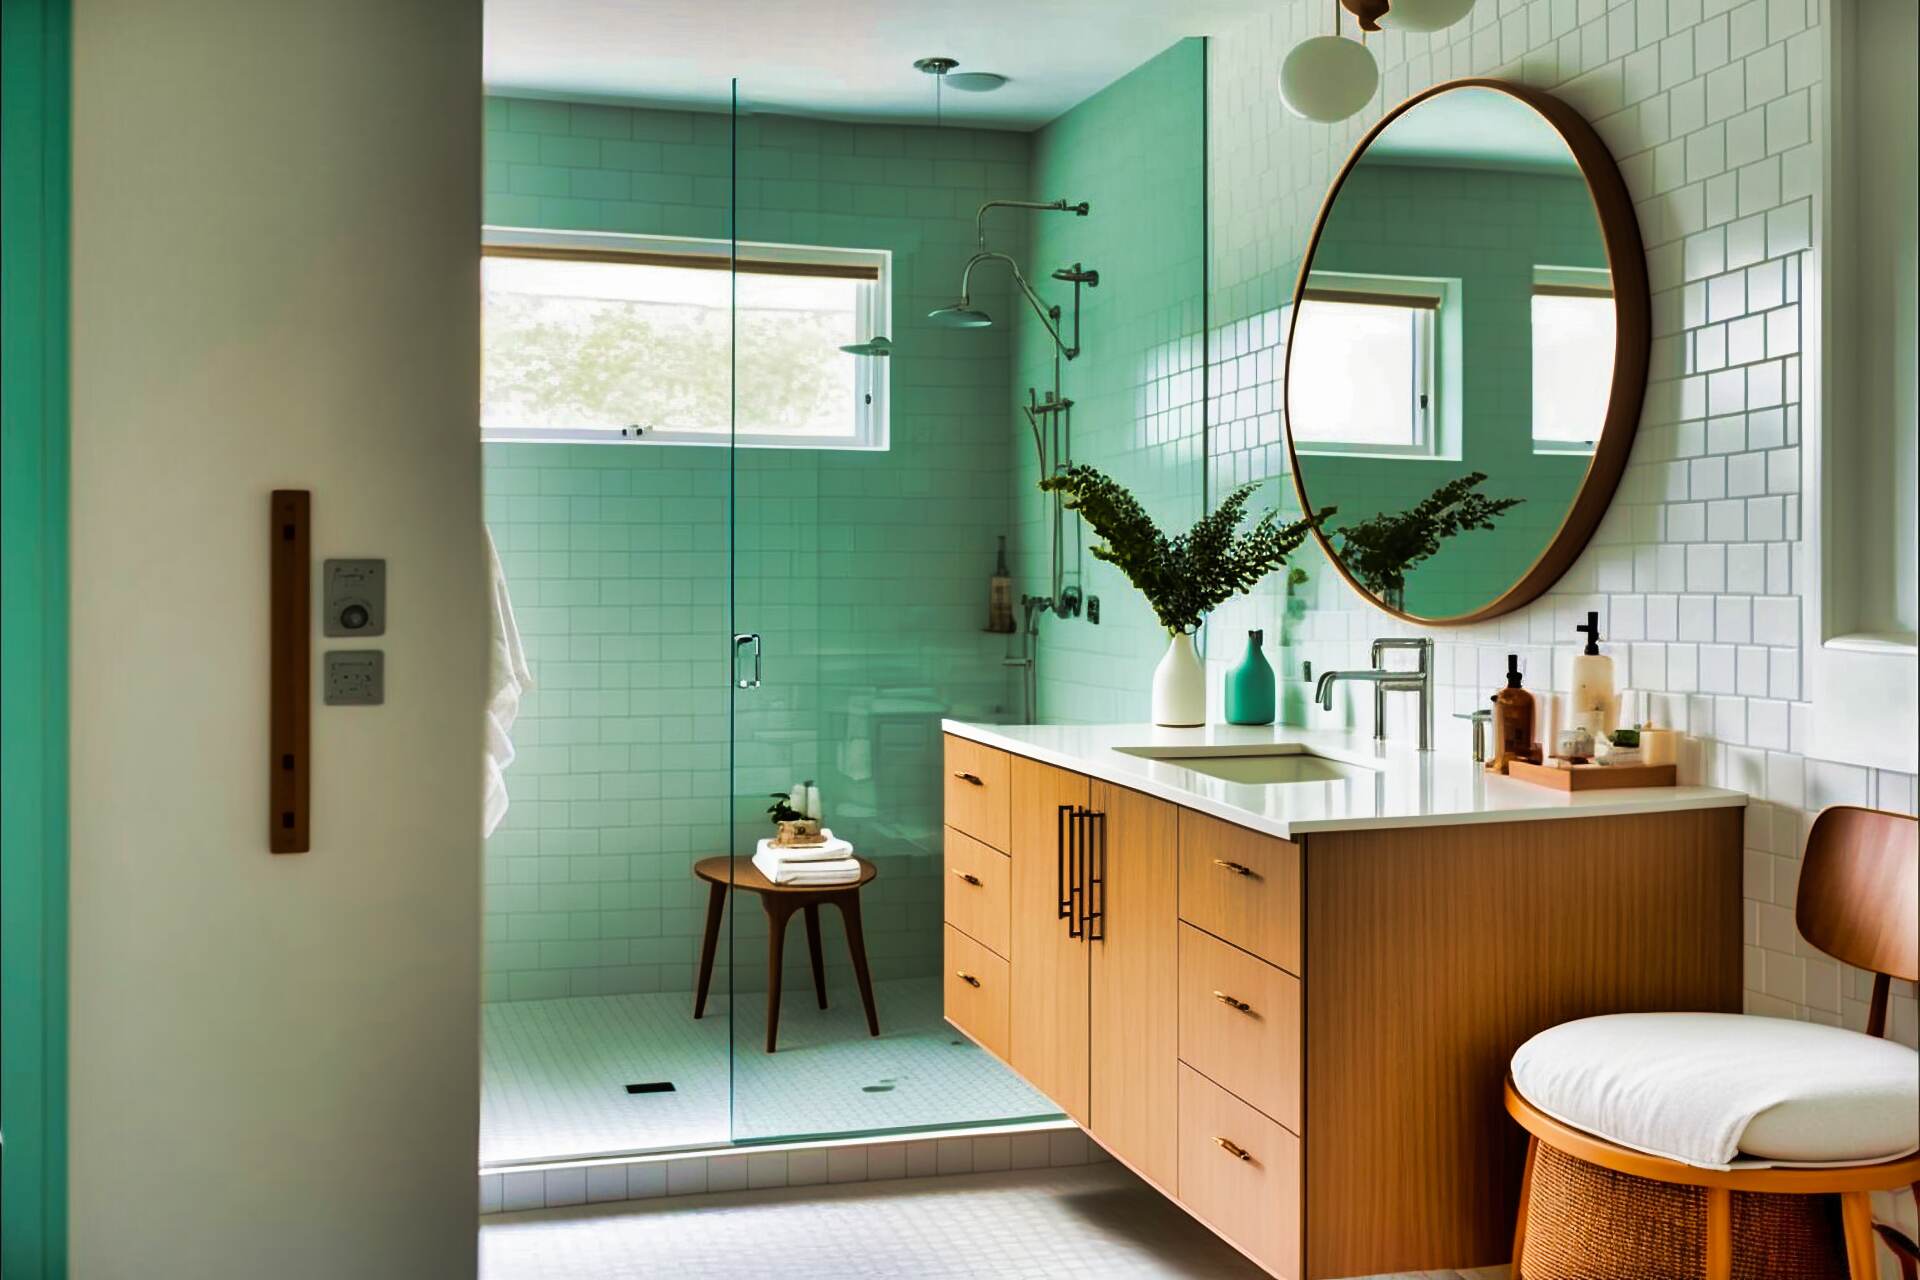 A Modern Bathroom With A Mid-Century Modern Aesthetic. The Space Features A Floating Vanity With A White Sink And A Large Round Mirror. The Shower Has A Glass Partition, A Rainfall Showerhead, And A Built-In Bench. The Floors Are A Light Wood-Look Tile, And The Walls Are White Subway Tile With A Black Accent Stripe.